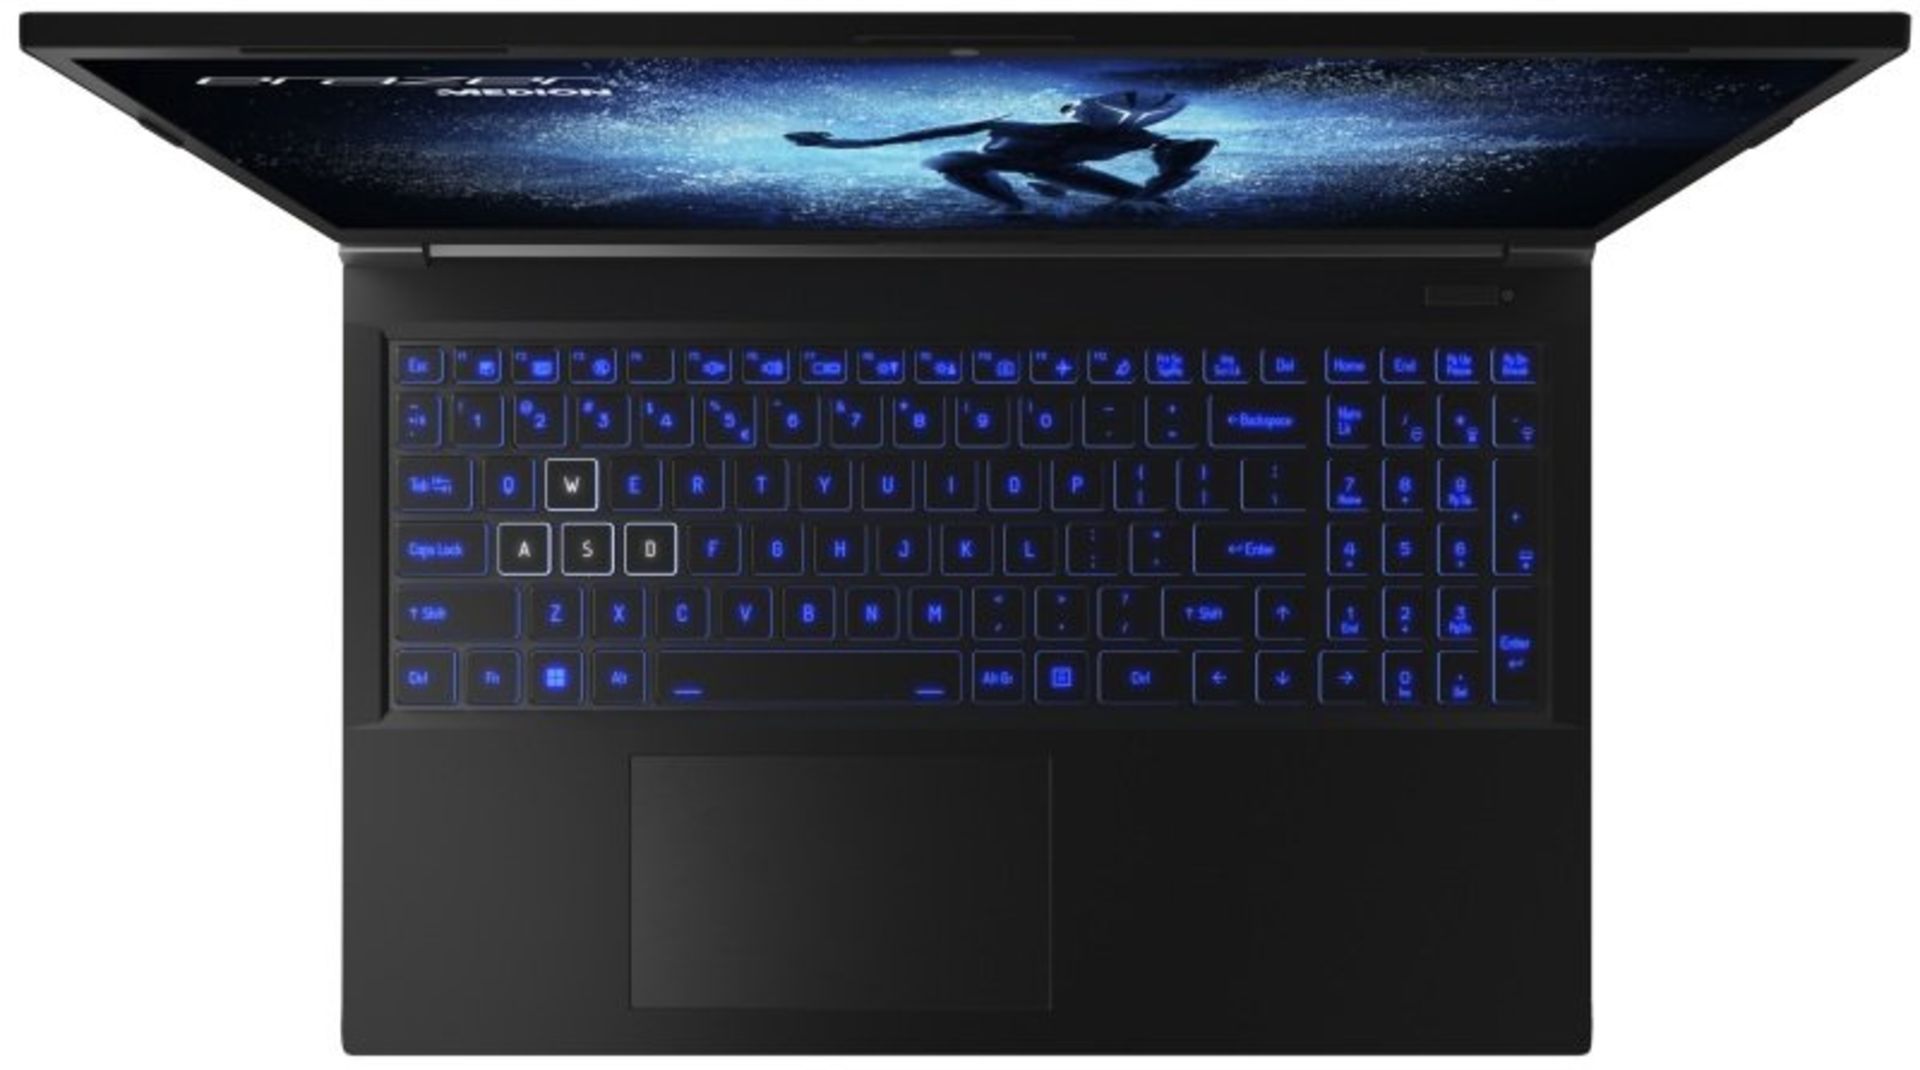 NEW & BOXED MEDION Erazer Deputy P50 - MD 62533 Gaming Laptop. RRP £1306.66. Intel Core i7-12700H, - Image 4 of 6